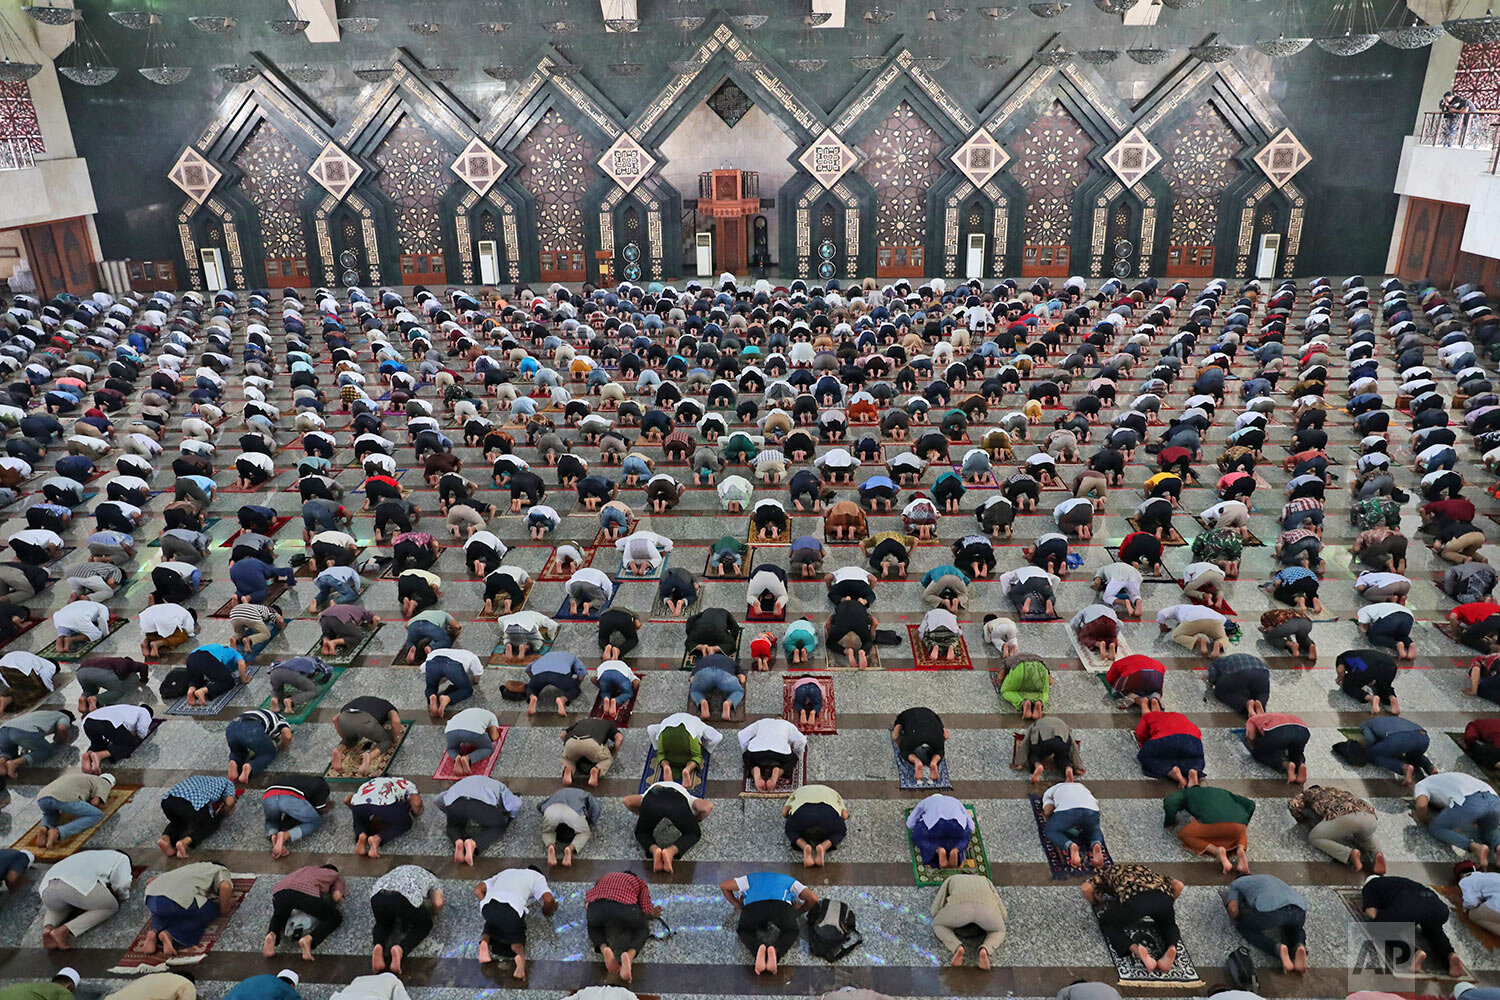  Muslim men pray spaced apart amid coronavirus concerns during a Friday prayer at At-Tin mosque in Jakarta, Indonesia, Friday, June 5, 2020. (AP Photo/Achmad Ibrahim) 